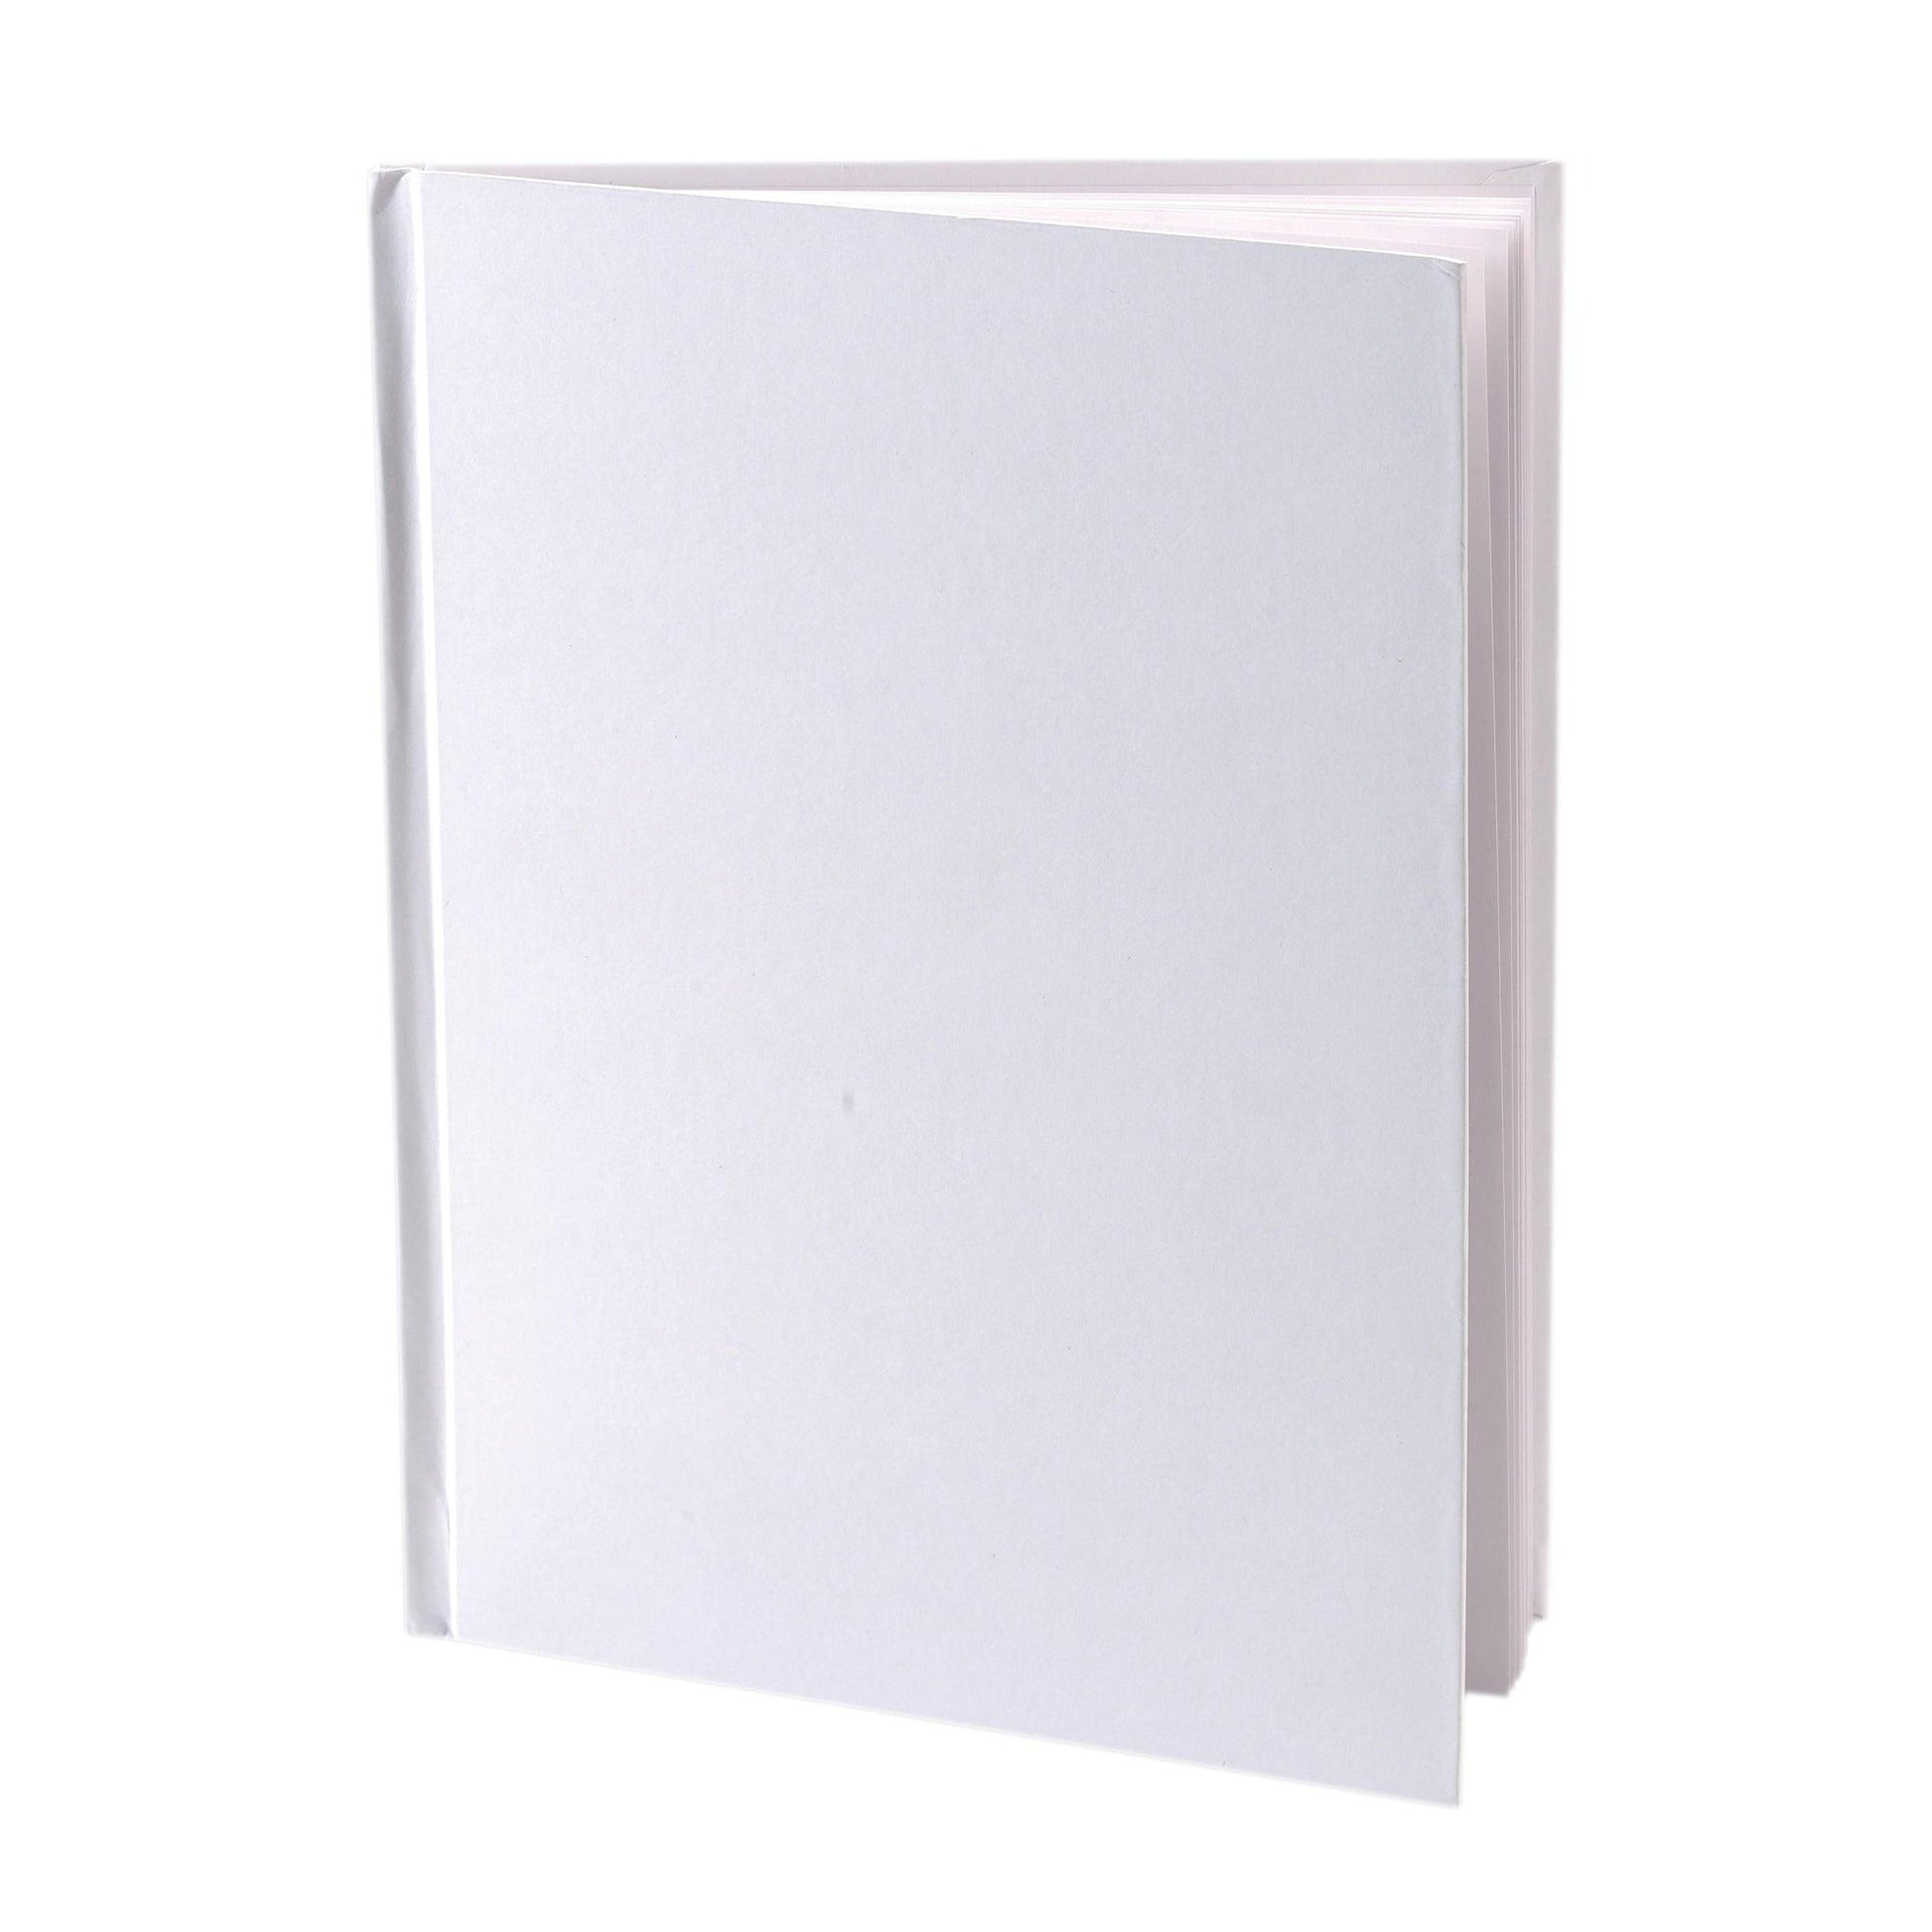 Hardcover Blank Book 6" x 8" Portrait, White, Pack of 12 - Loomini